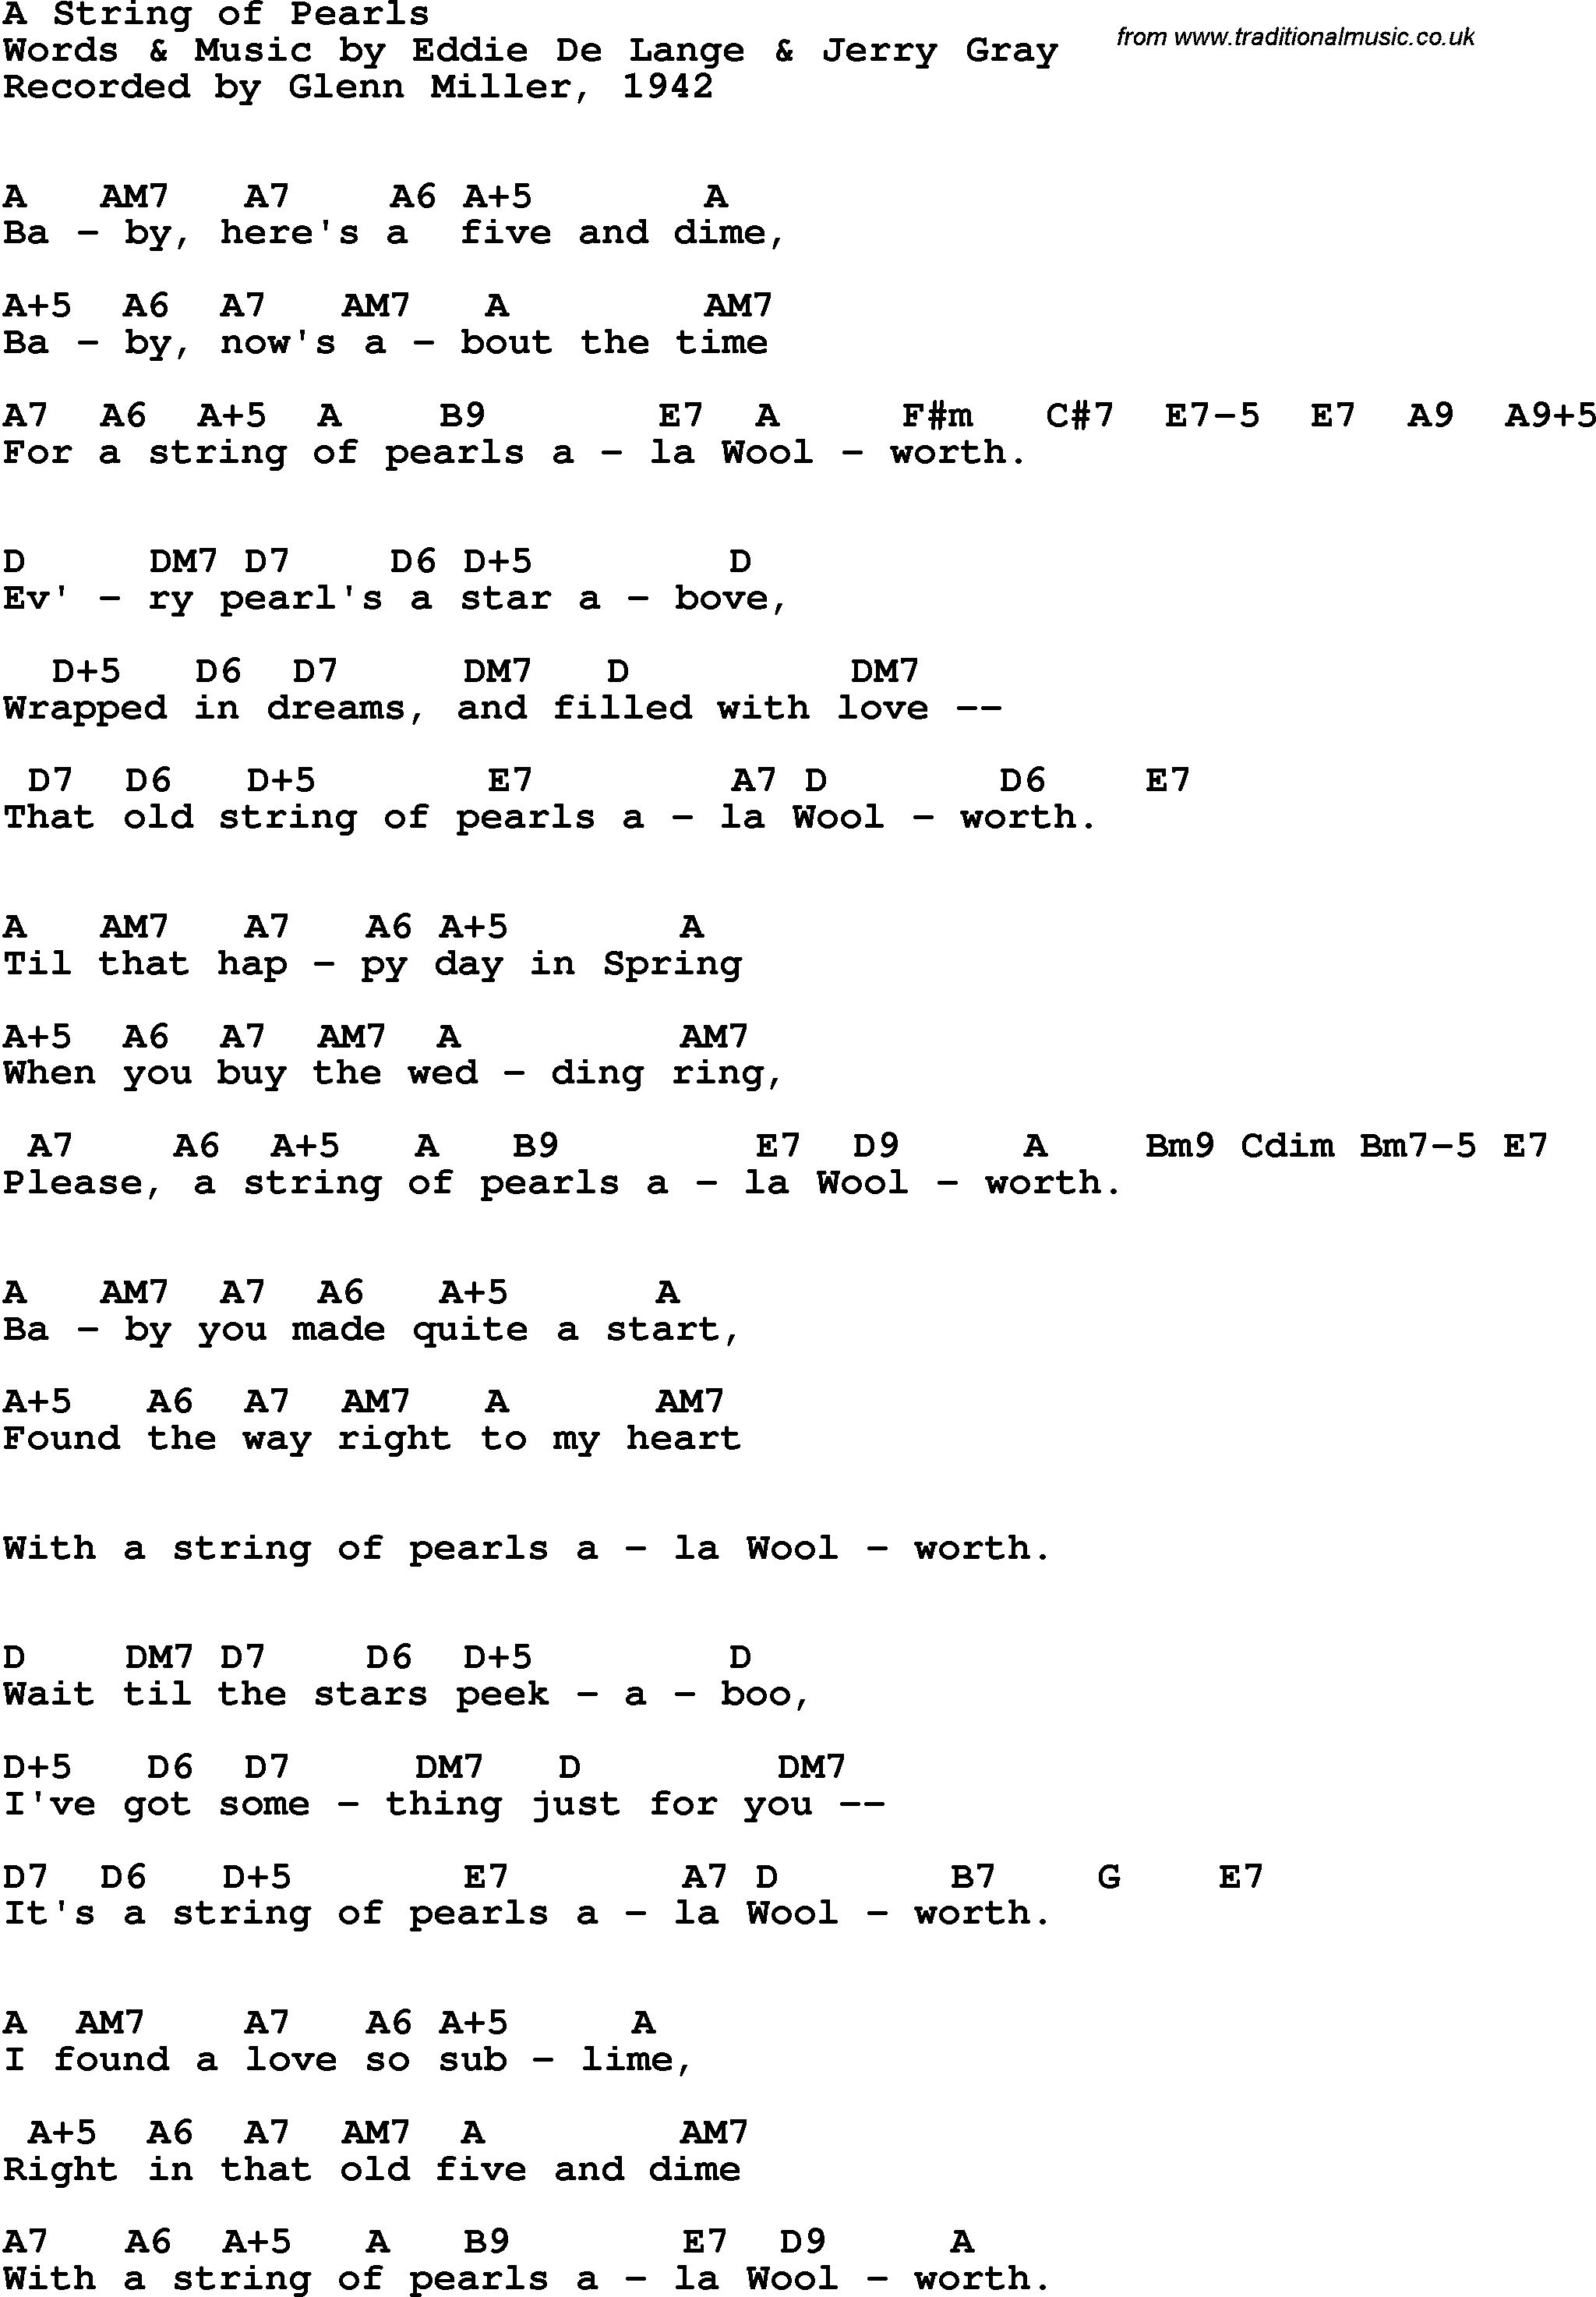 Song Lyrics with guitar chords for A String Of Pearls - Glenn Miller, 1942